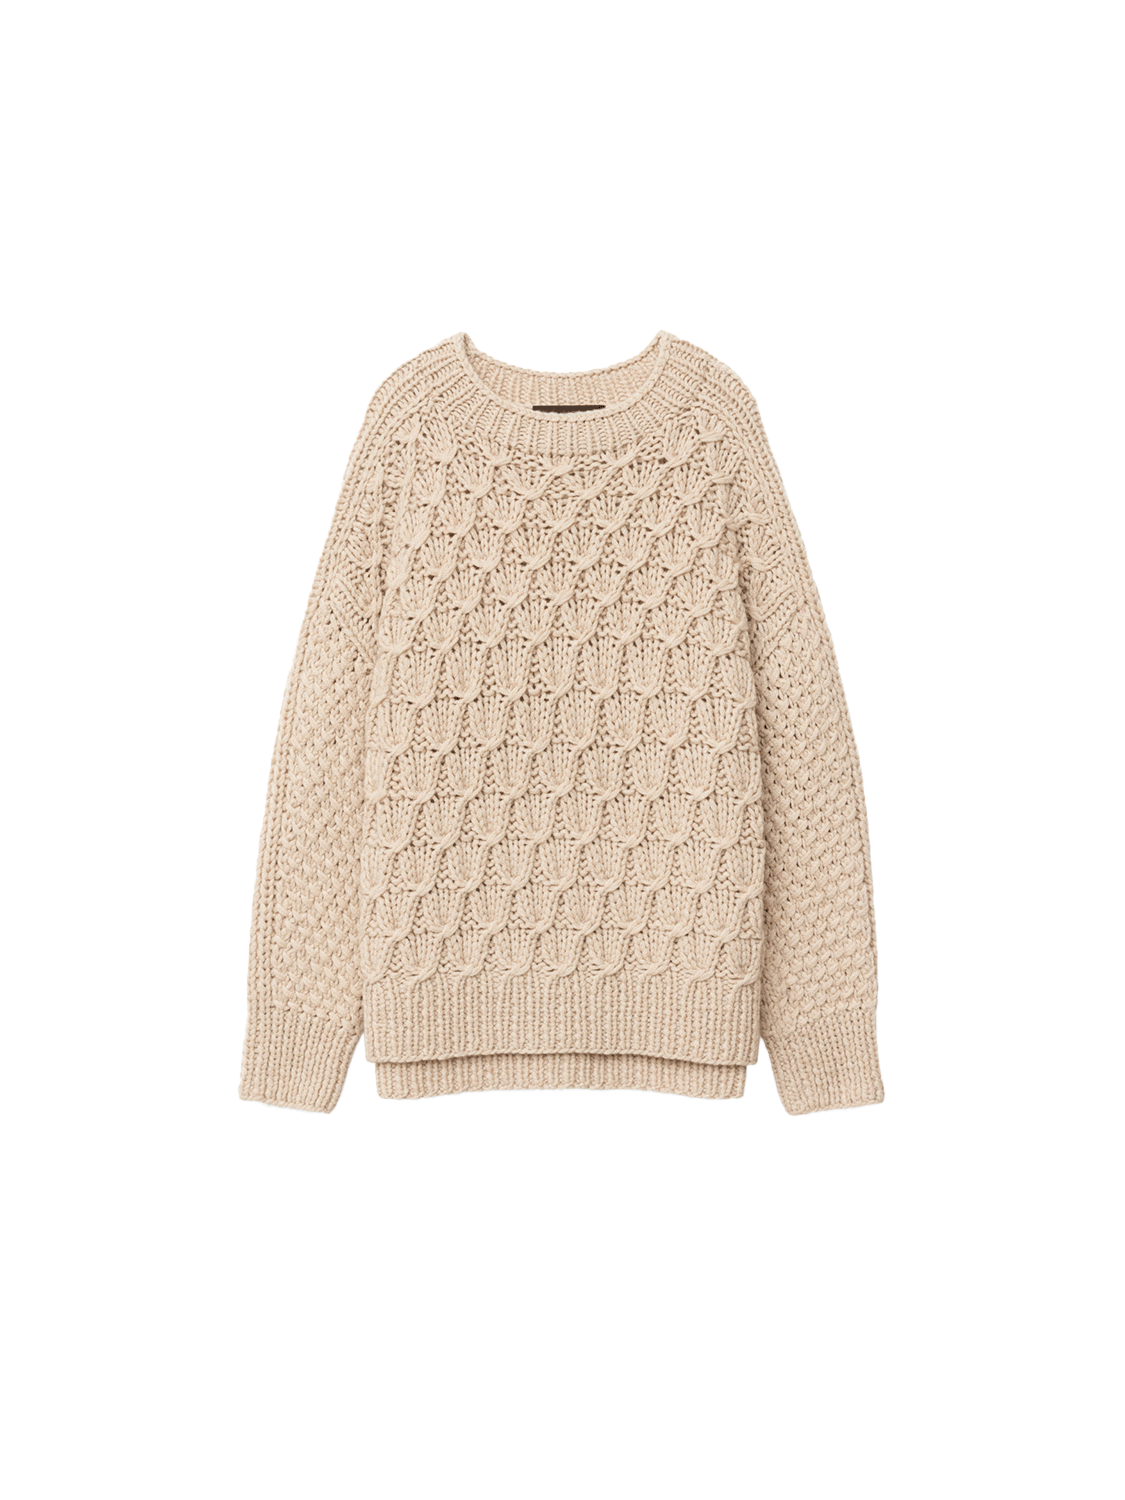 Hope - Cashmere cable knit sweater 